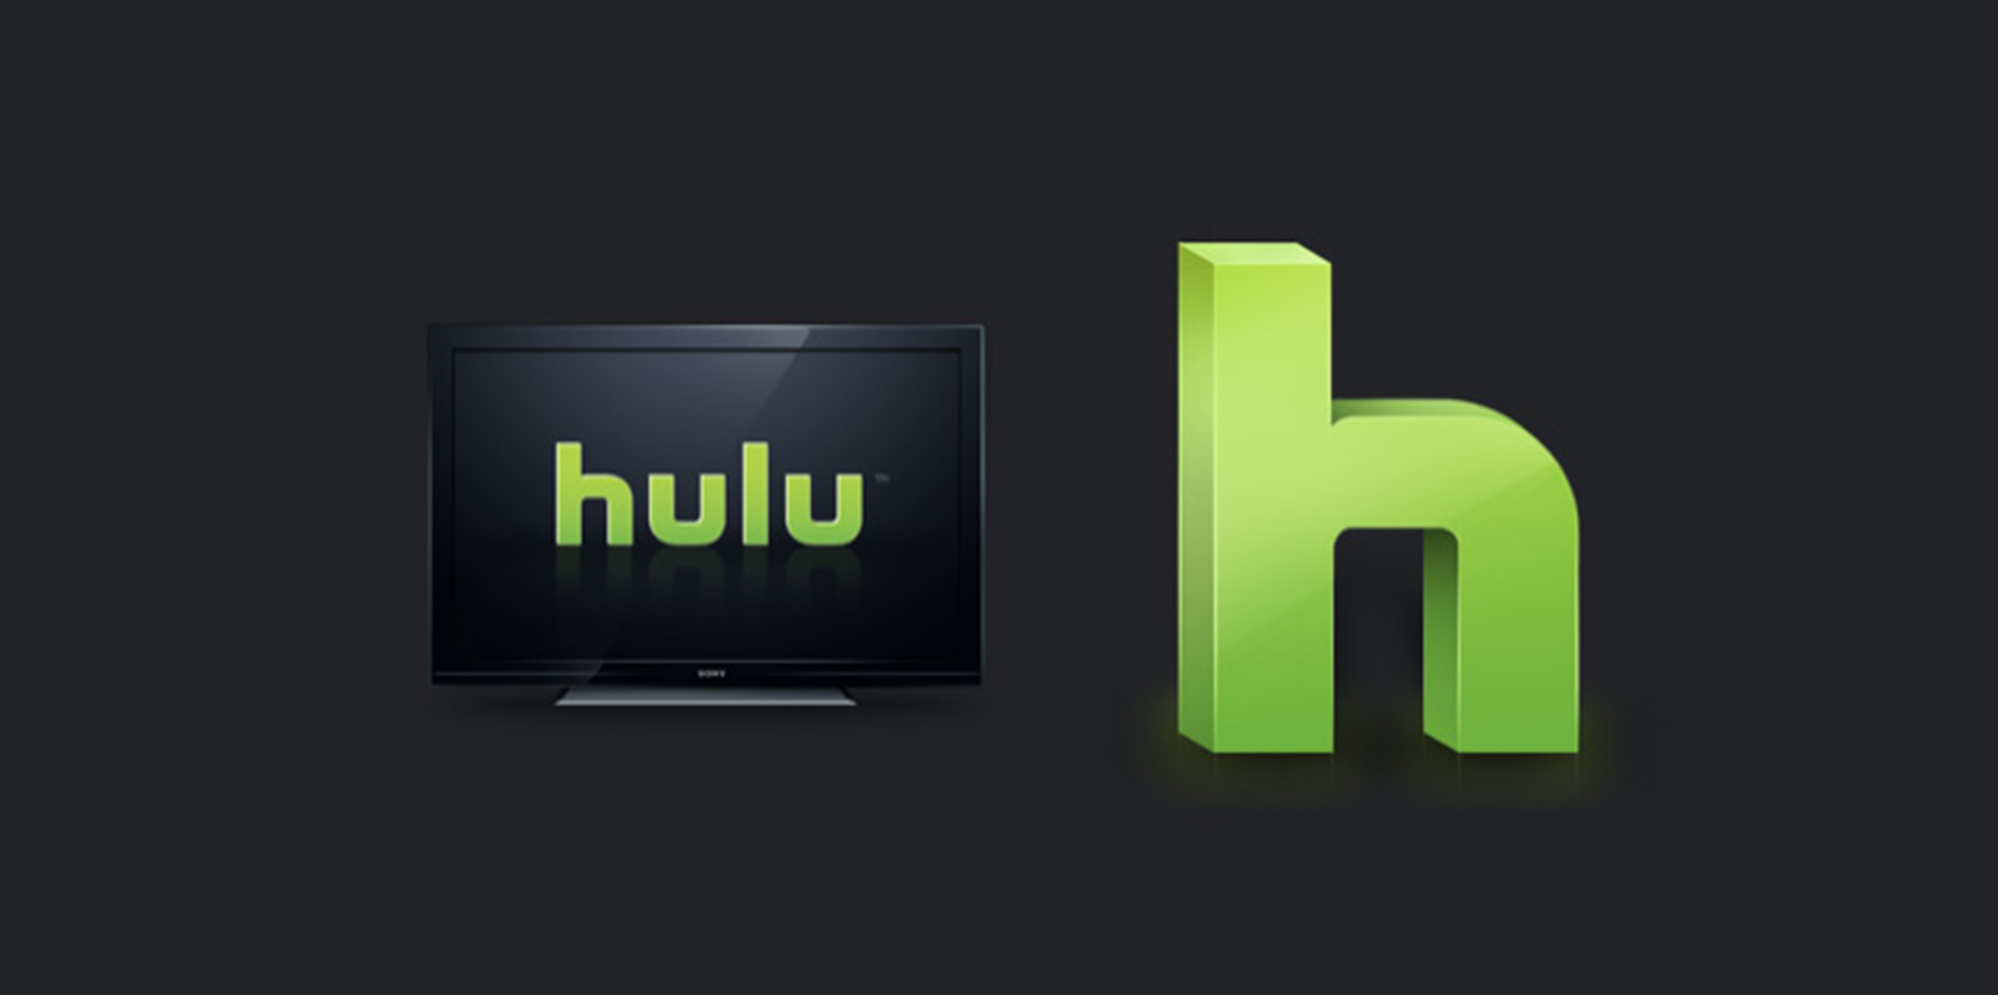 Hulu officially launches its live TV service at 39.99 per month